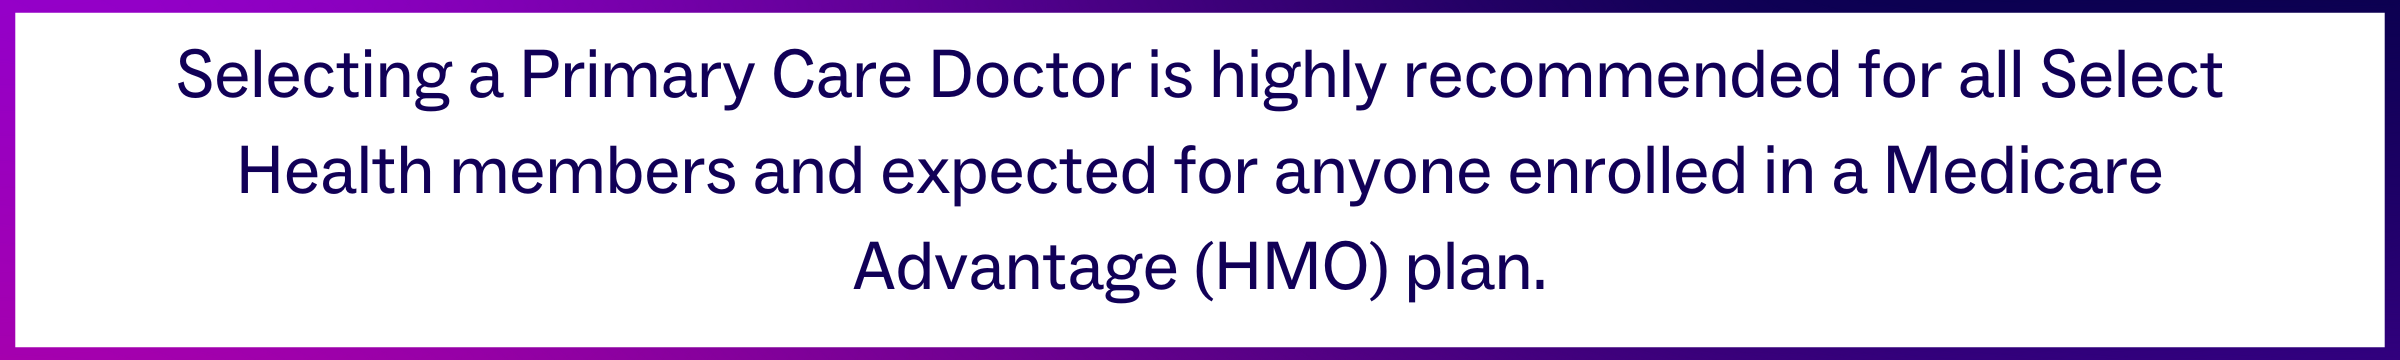 Selecting a Primary Care Doctor is highly recommended for all Select Health members and expected for anyone enrolled in a Medicare Advantage (HMO) plan.